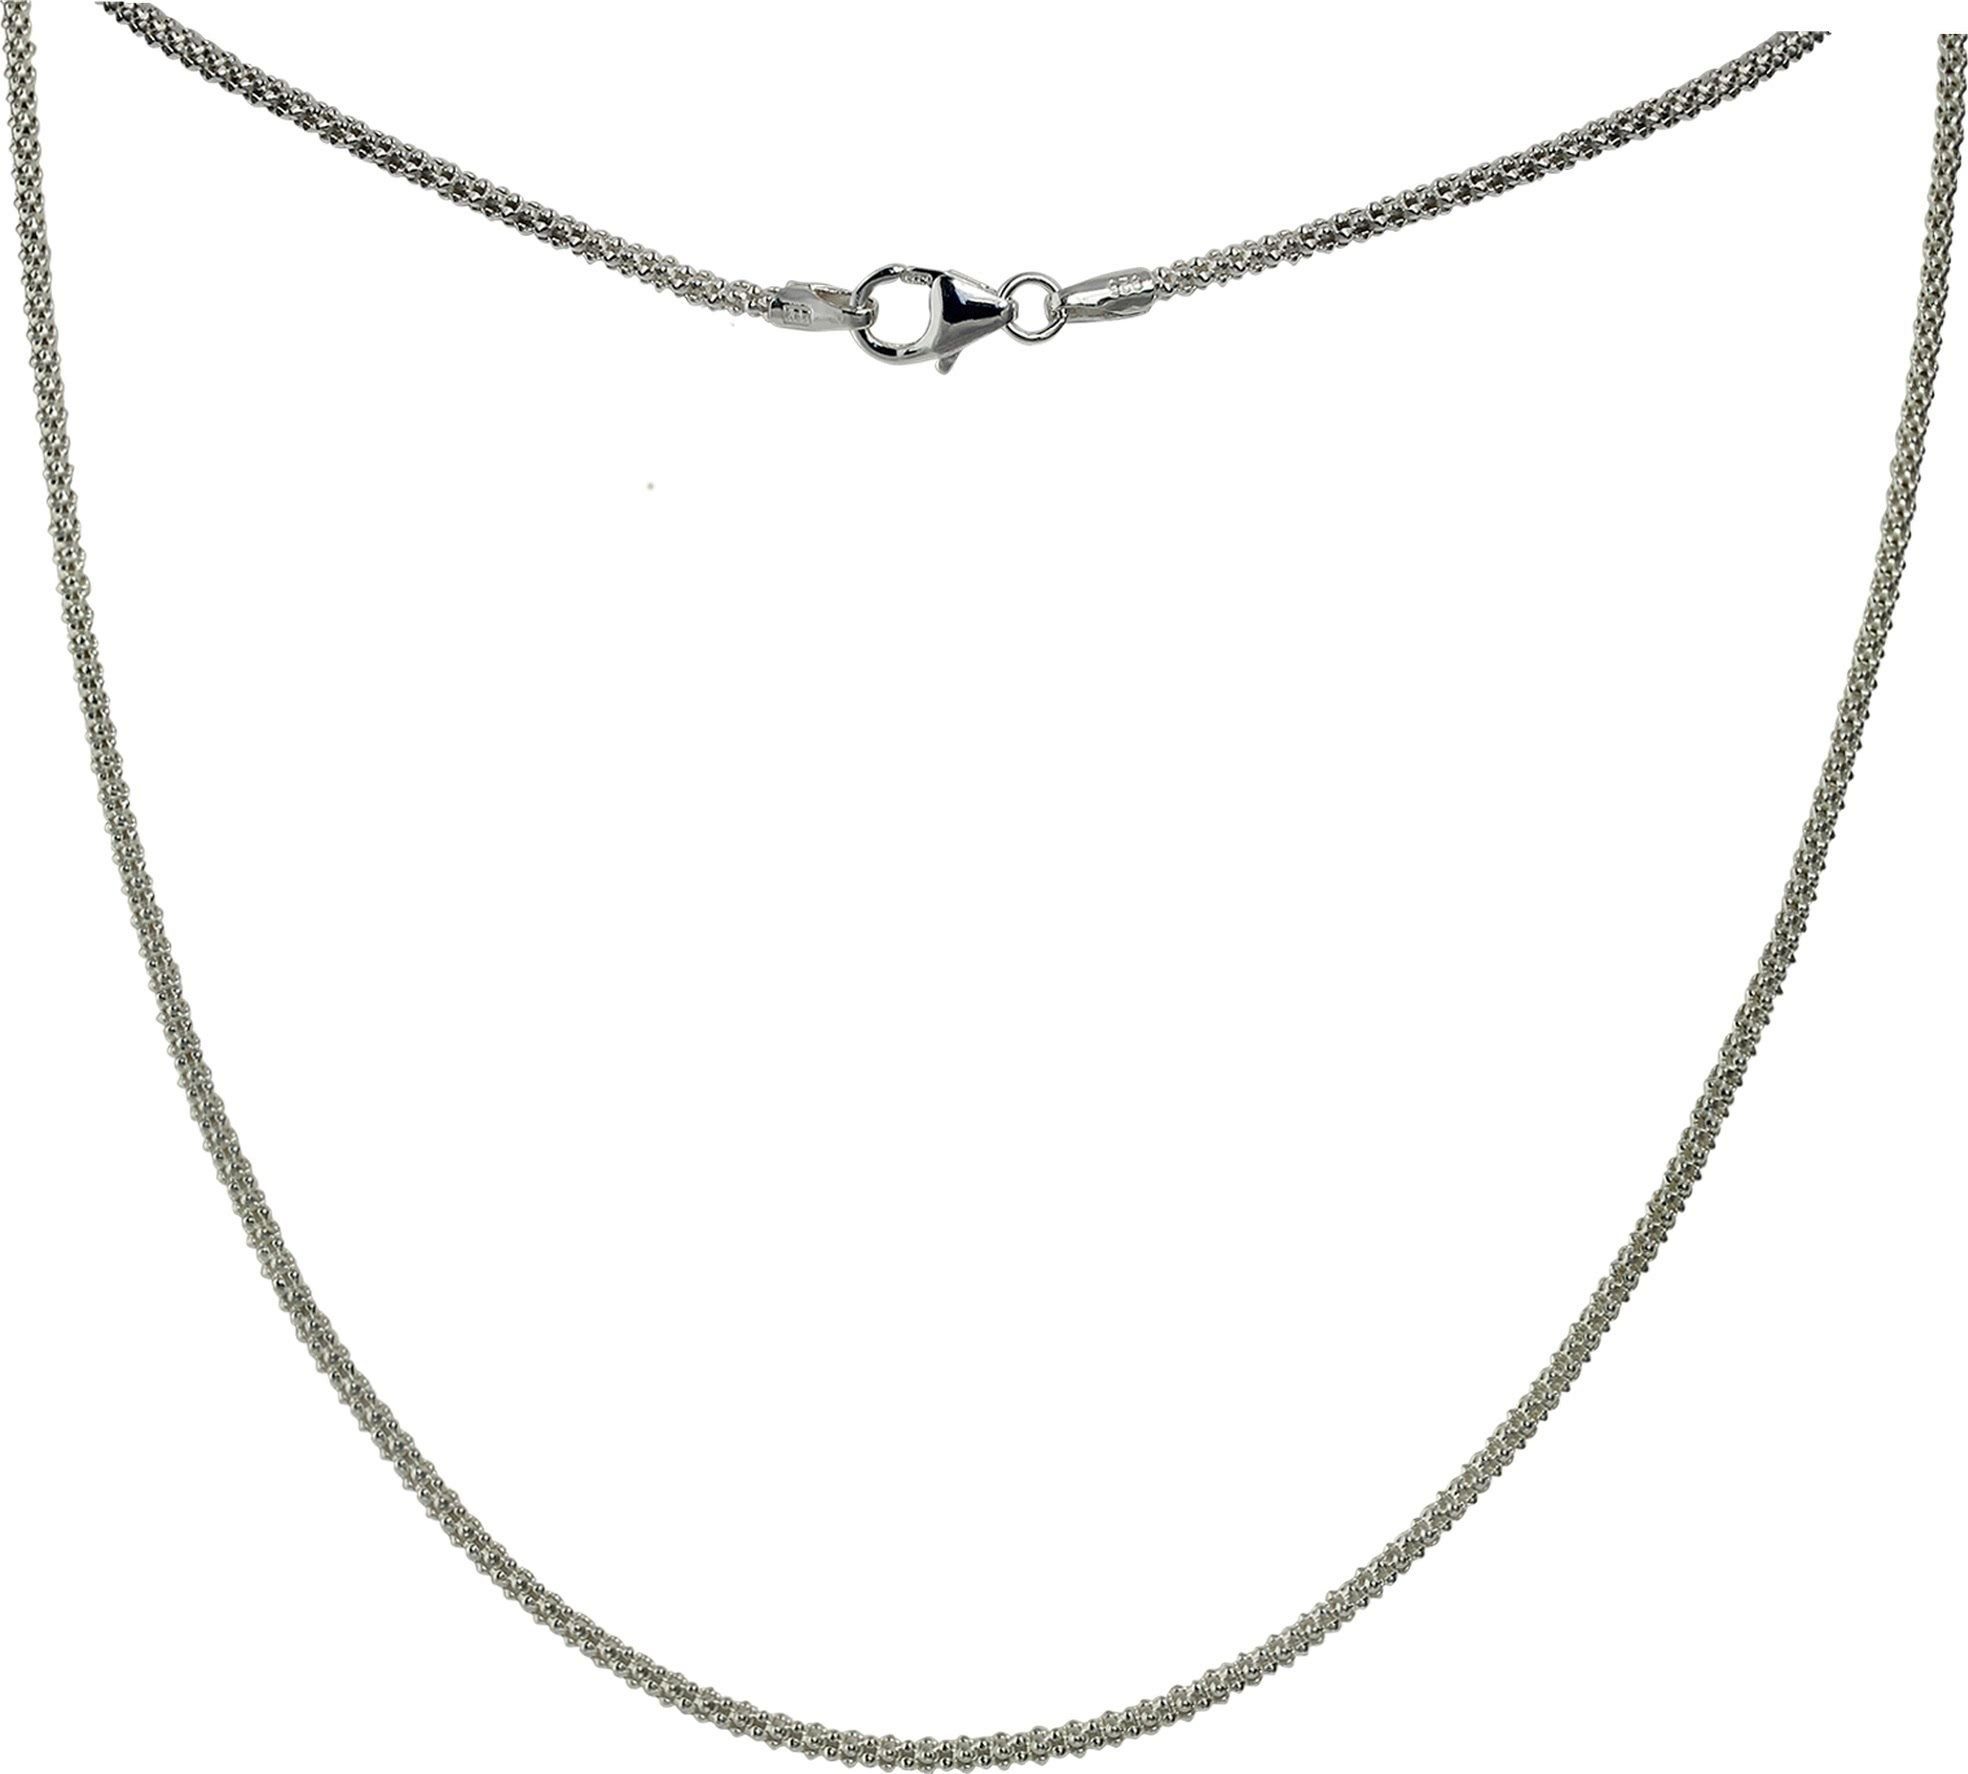 SilberDream Collier SilberDream Collier silber Schmuck 45cm, Colliers ca. 45cm, 925 Sterling Silber, Farbe: silber, Made-In Germany